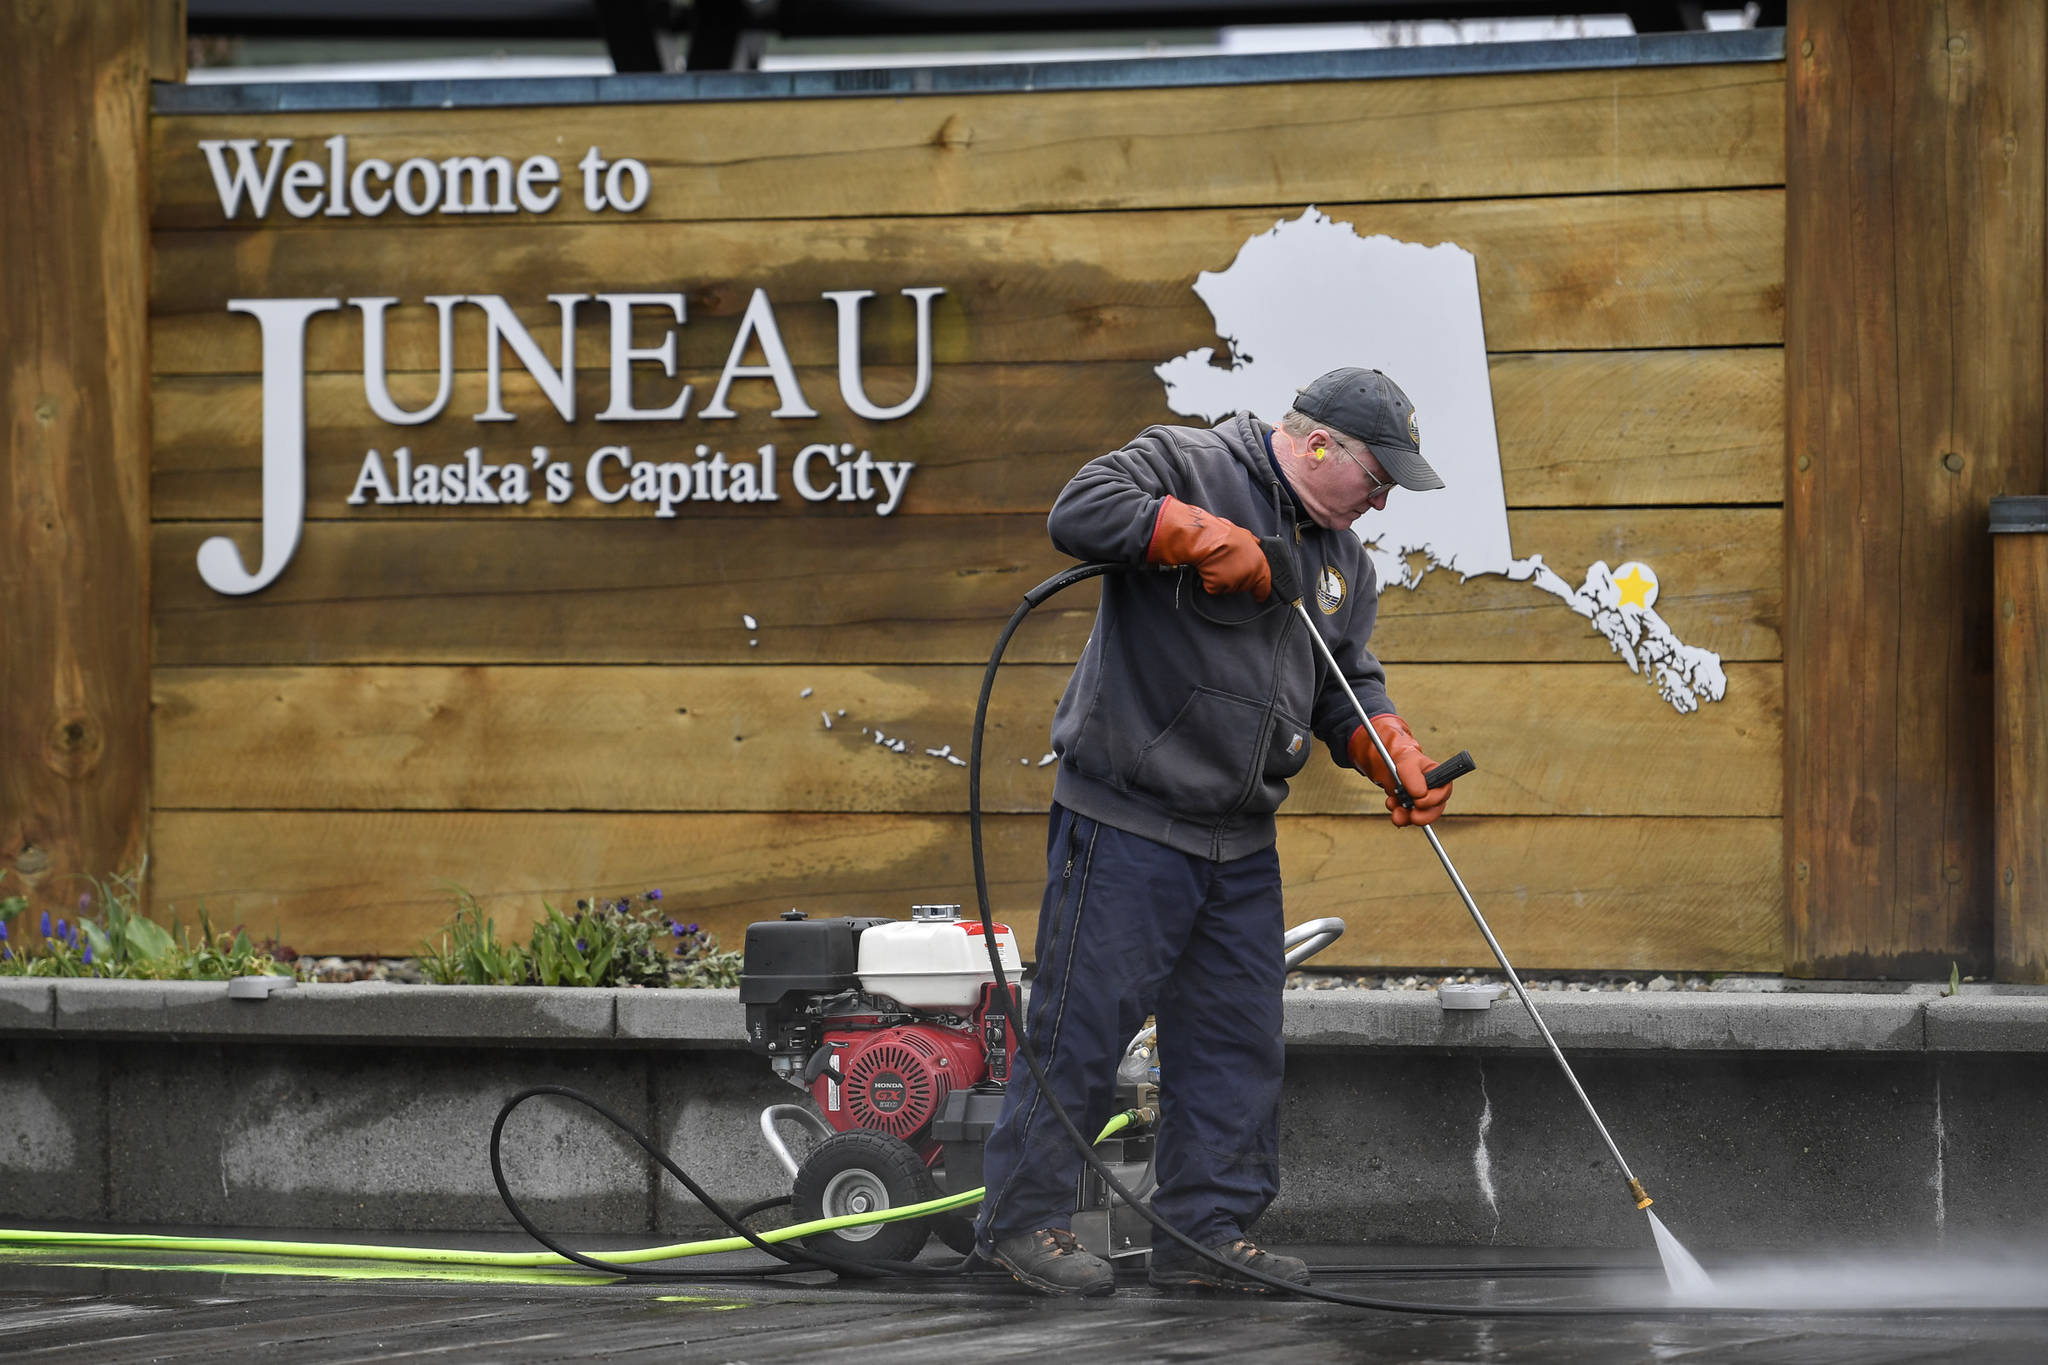 Dave Morgan, of the city’s Dock and Harbors department, pressure washes the sidewalk near the downtown Visitors Center on Friday, April 19, 2019. (Michael Penn | Juneau Empire)